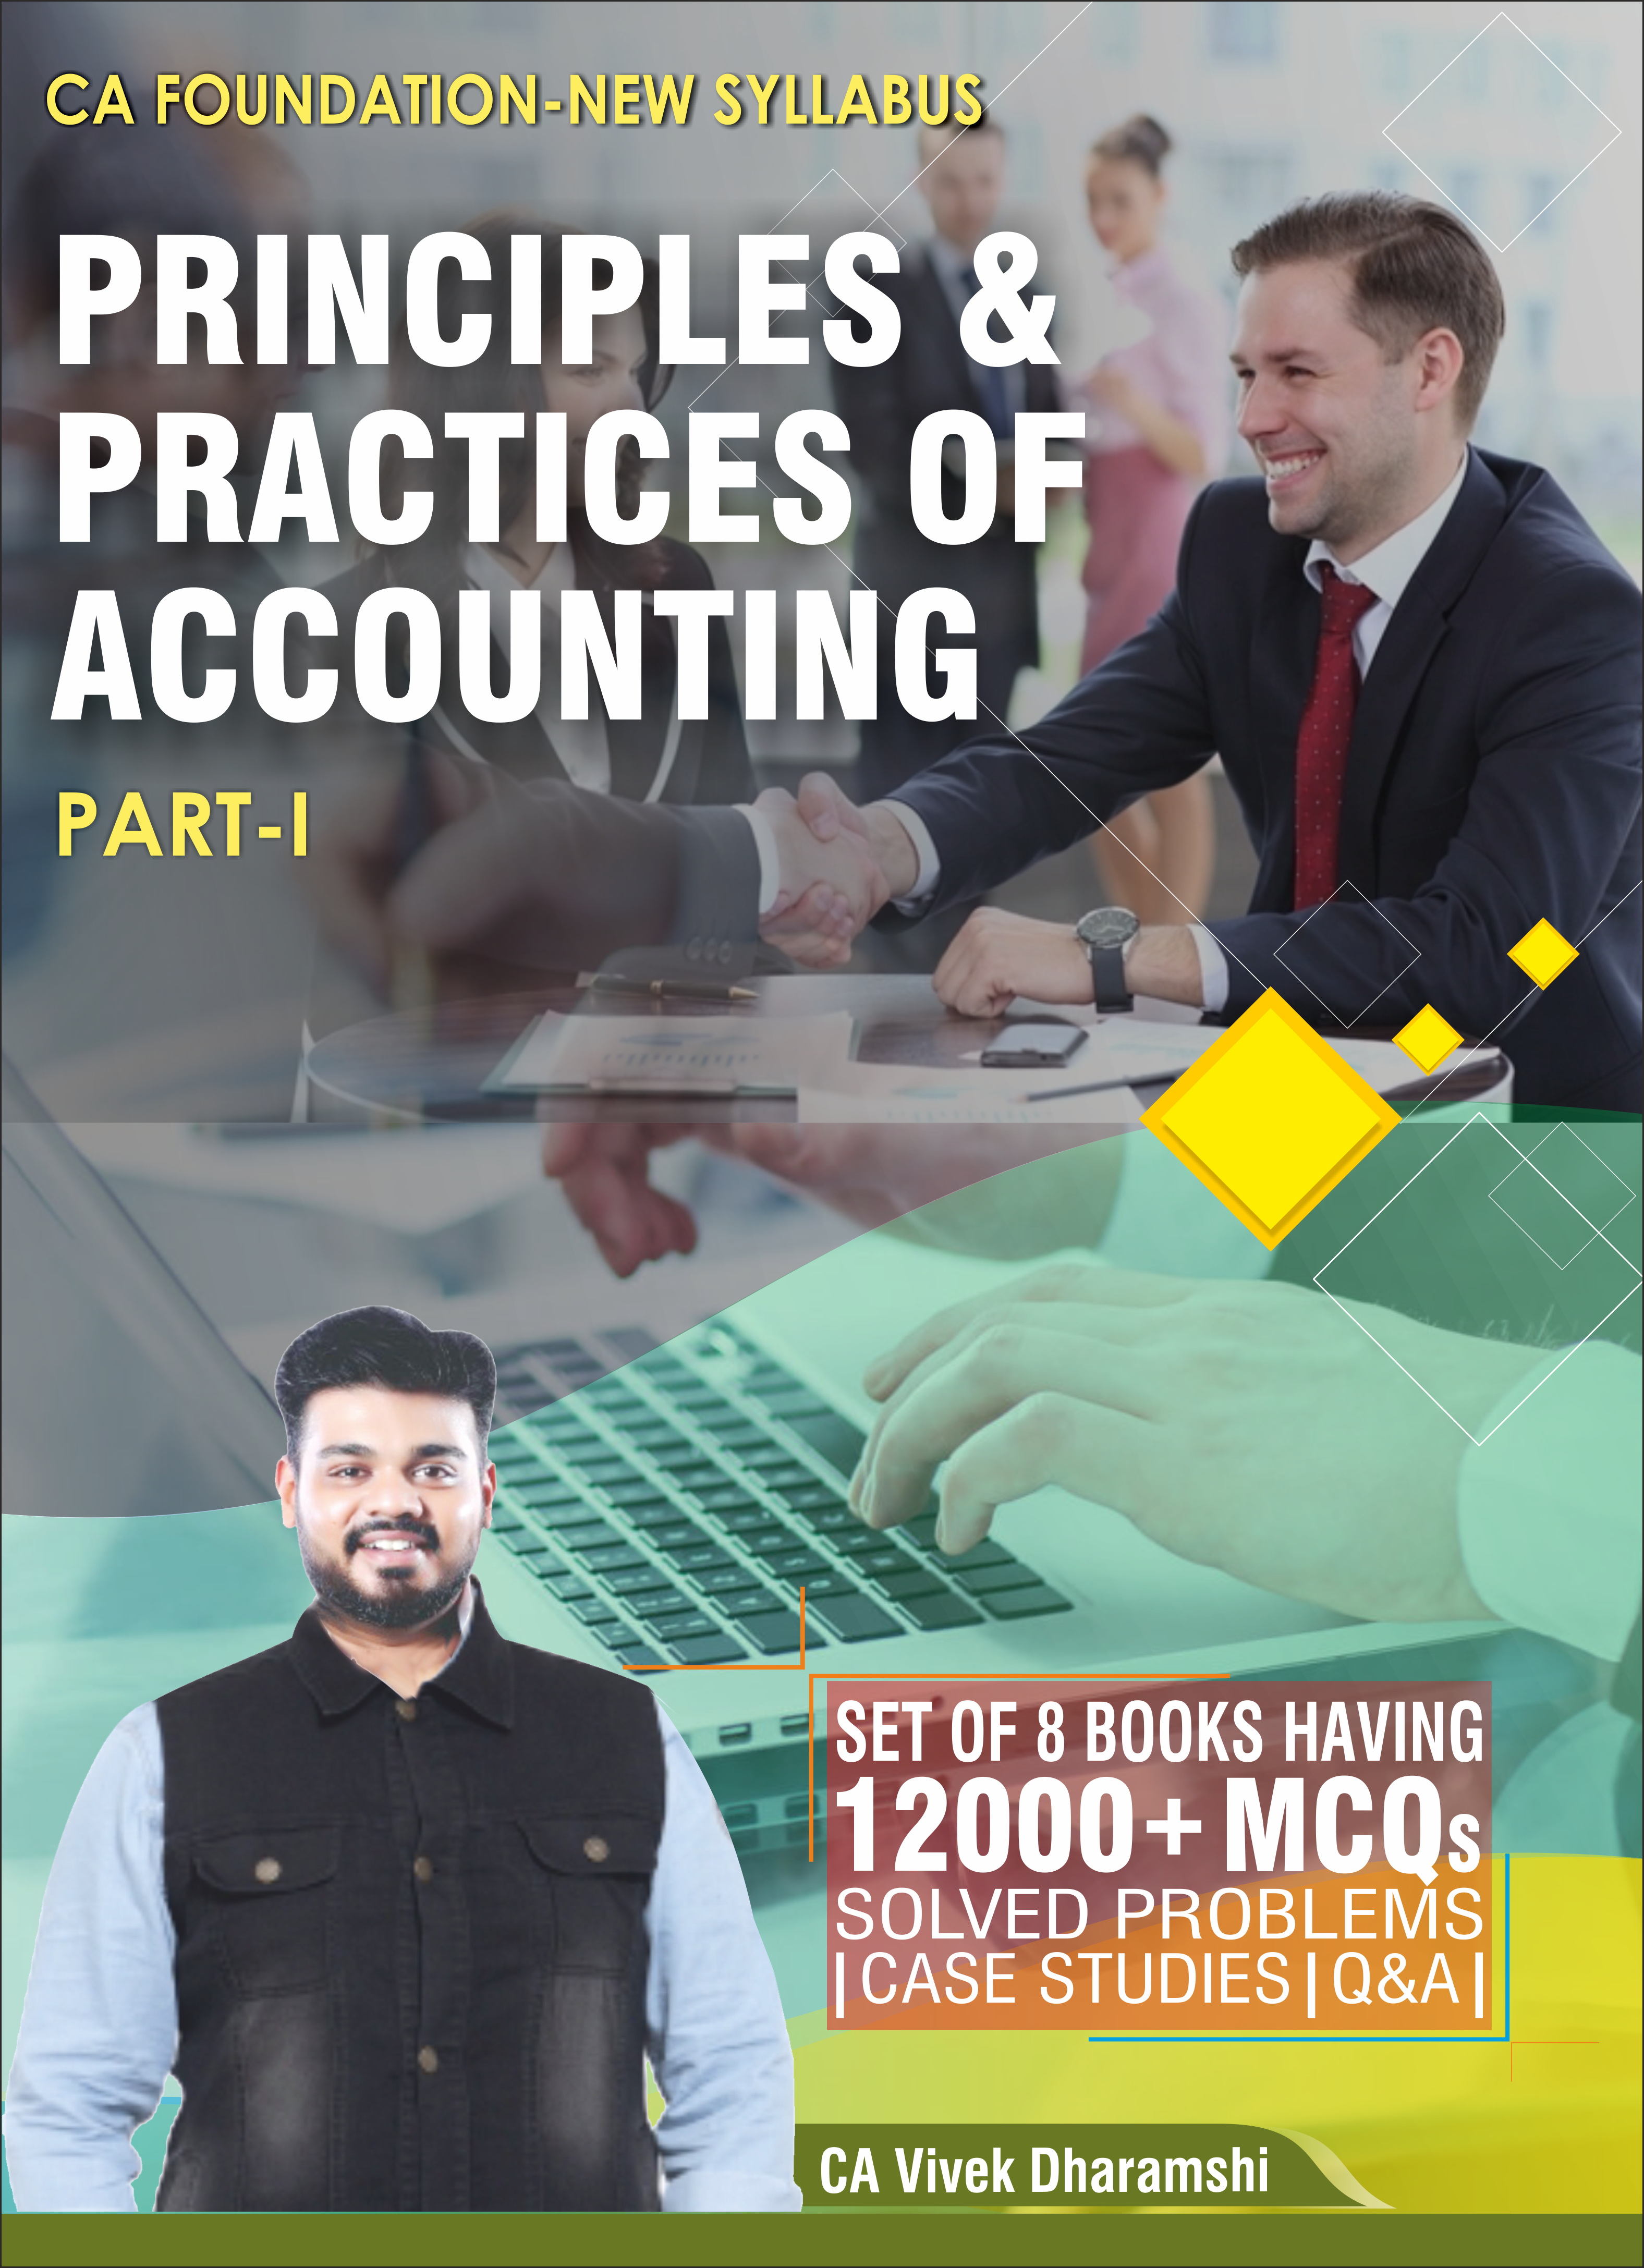 Connex’s_Largest_Question_Bank_I_CA_Foundation_–_Principles_andd_Practices_of_Accounting_Part_1_only_550_Solved_Problems_andd_Objective_QanddA_Covers_only_Module_1_Chapters___May_andd_Nov_2022_Attempt